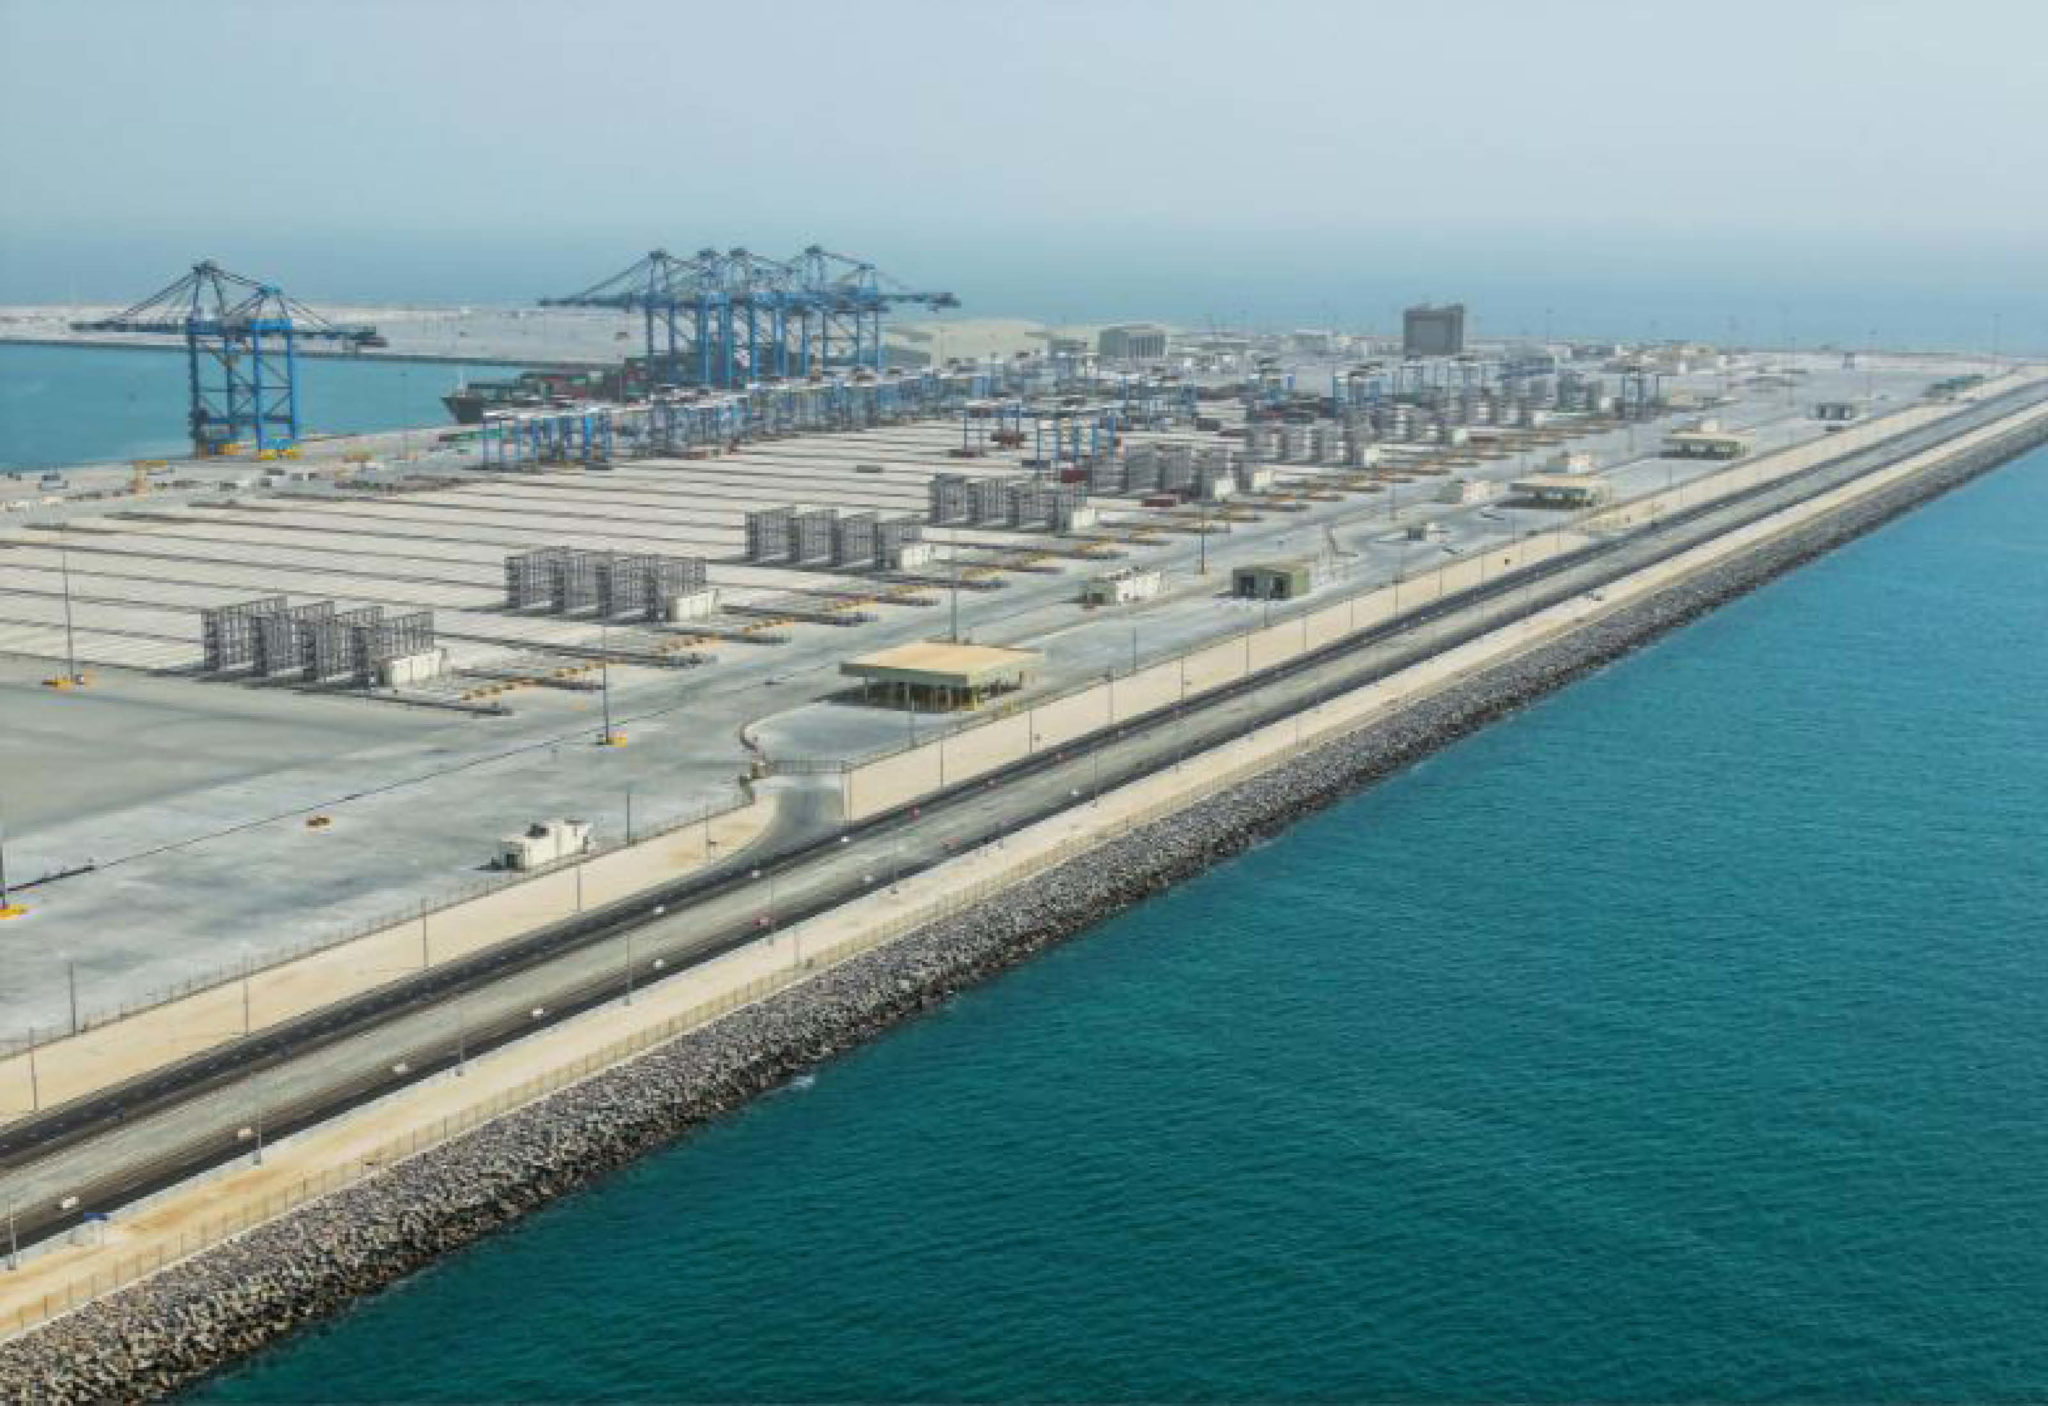 Kizad port, abu dhabi, abu dhabi planning council, uae, shipping, transport, security, safety, compliance, security planning, security design, risk, threat, risk assessment, built environment, architecture, industrial project